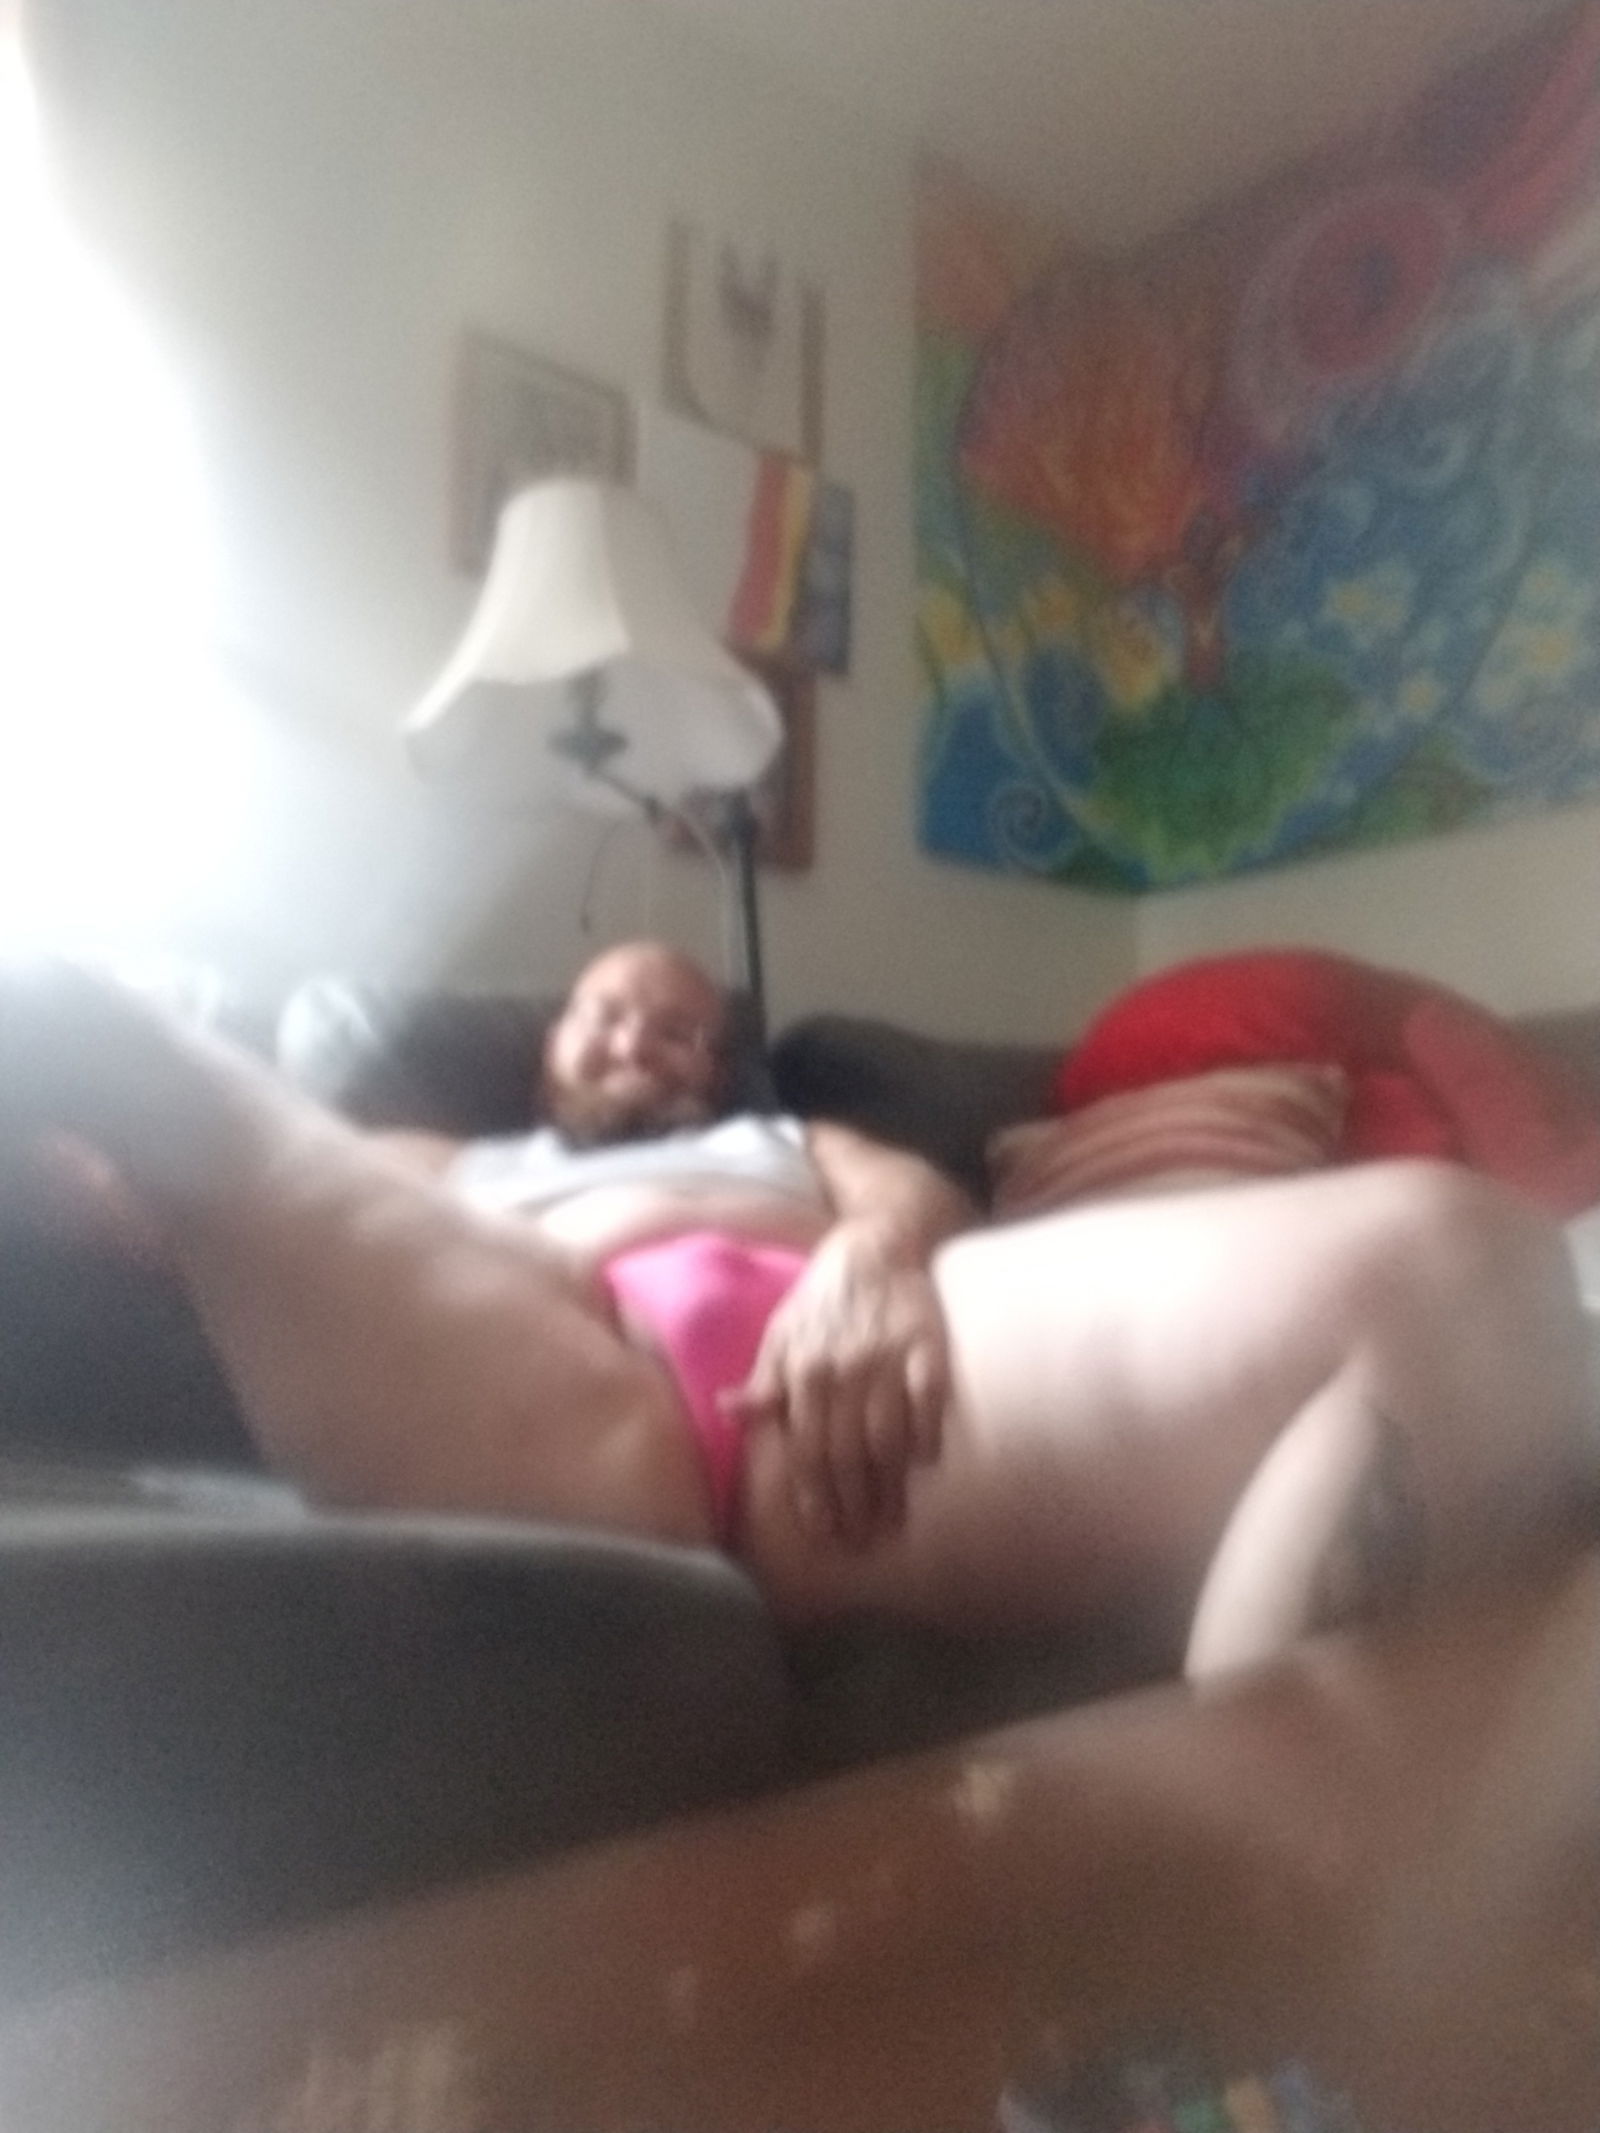 Photo by BigSvol1978 with the username @BigSvol1978,  May 17, 2019 at 1:36 AM. The post is about the topic Sex wearing panties or lingerie and the text says 'Got a quick photo opp in today with friends soft pink thong'